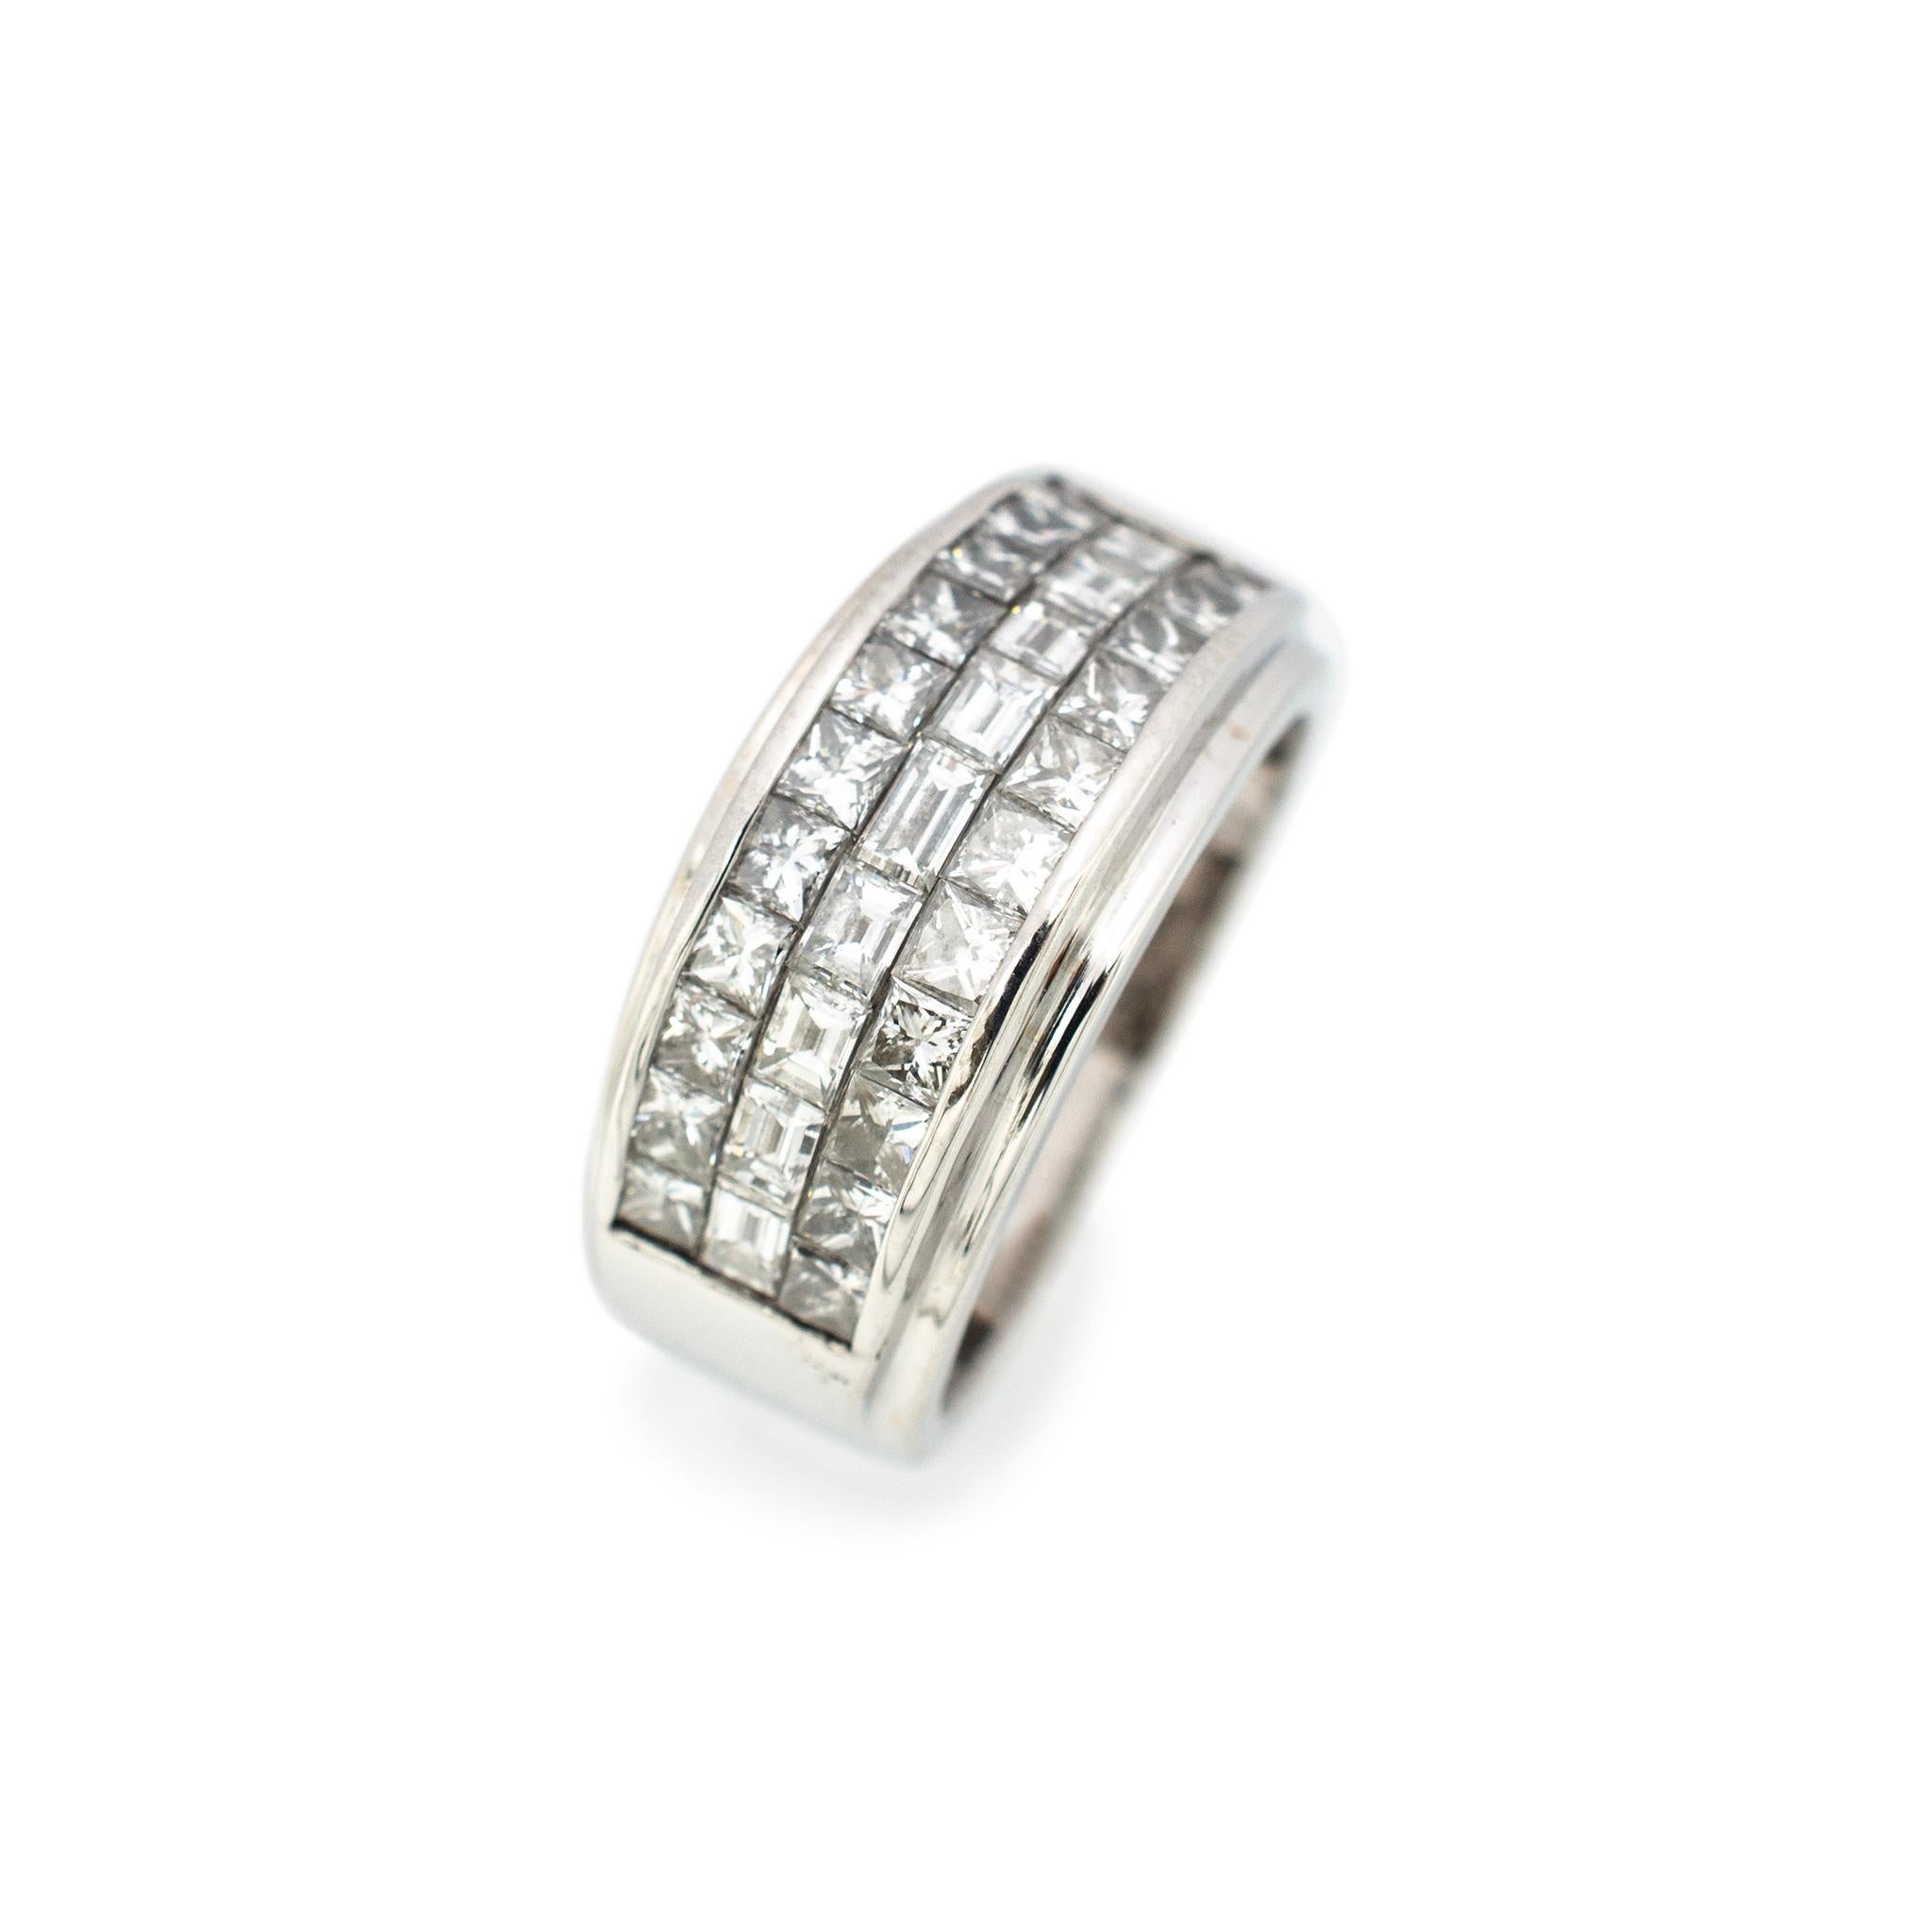 Gender: Ladies

Metal Type: 14K White Gold

Size: 7

Shank Maximum Width: 9.80 mm

Weight: 9.40 grams

Ladies 14K white gold three-row diamond wedding band with a tapered comfort-fit shank. Engraved with 